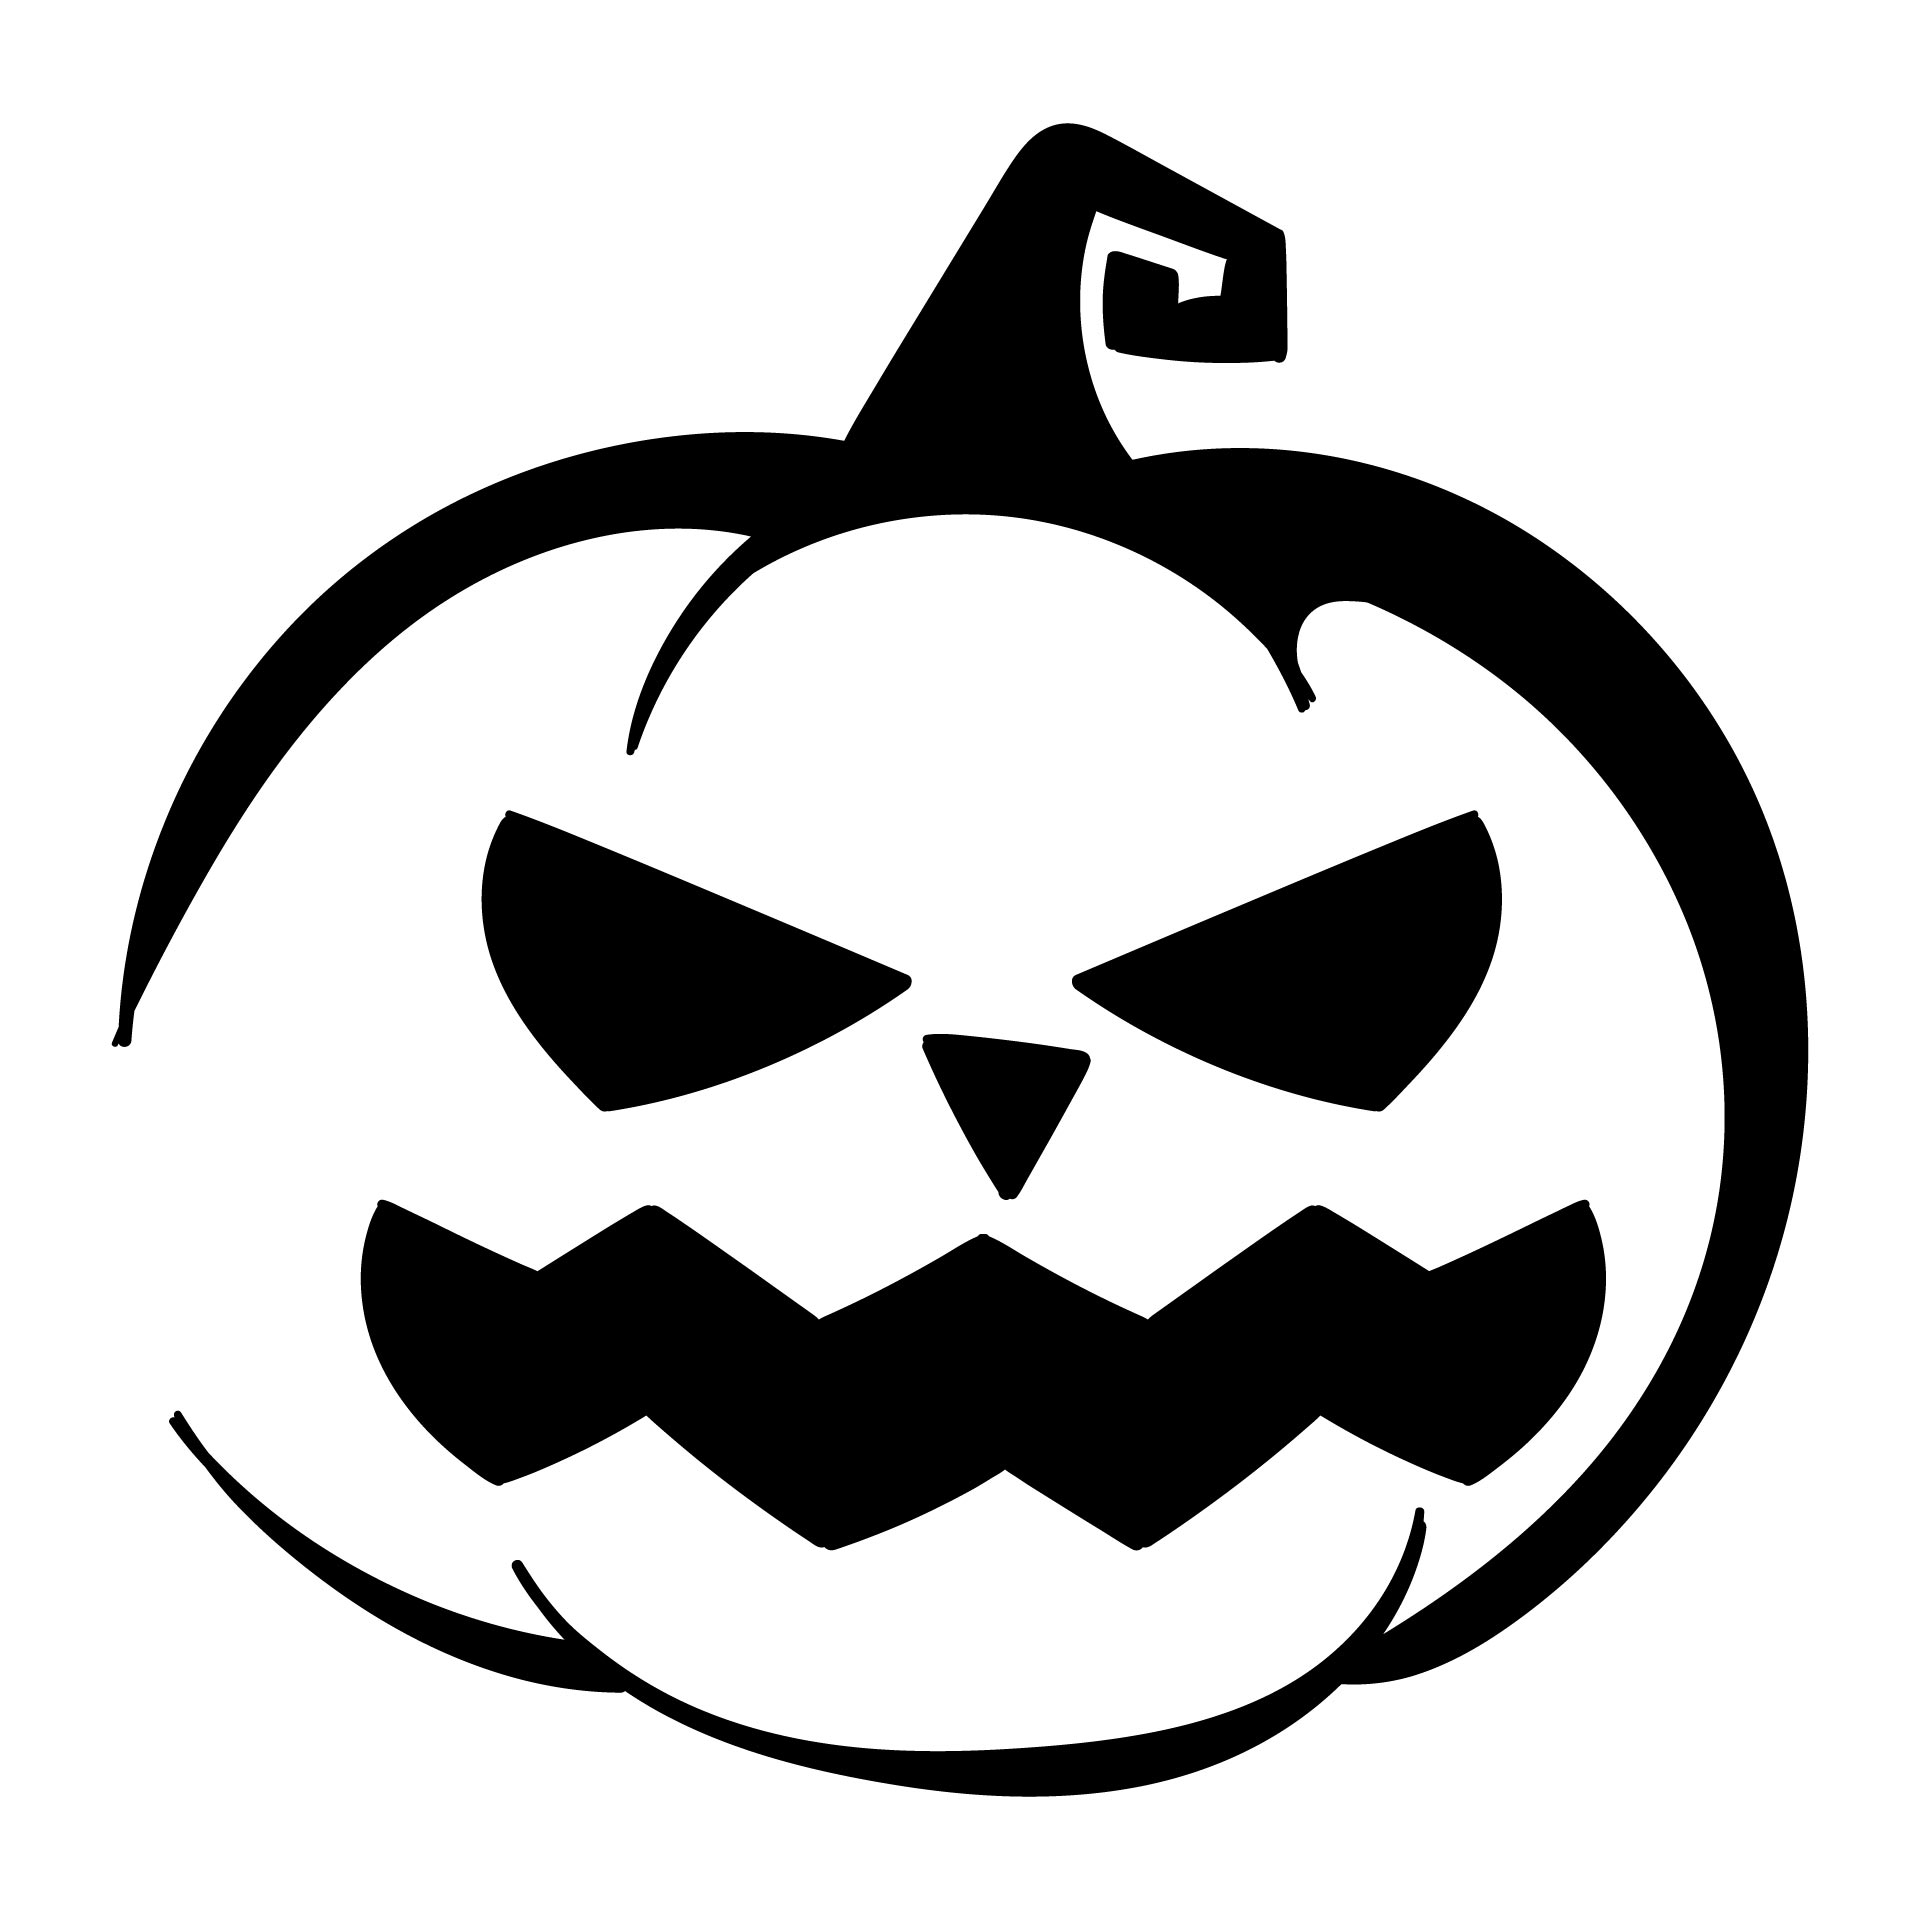 7 Best Images of Printable Halloween Templates And Patterns Halloween